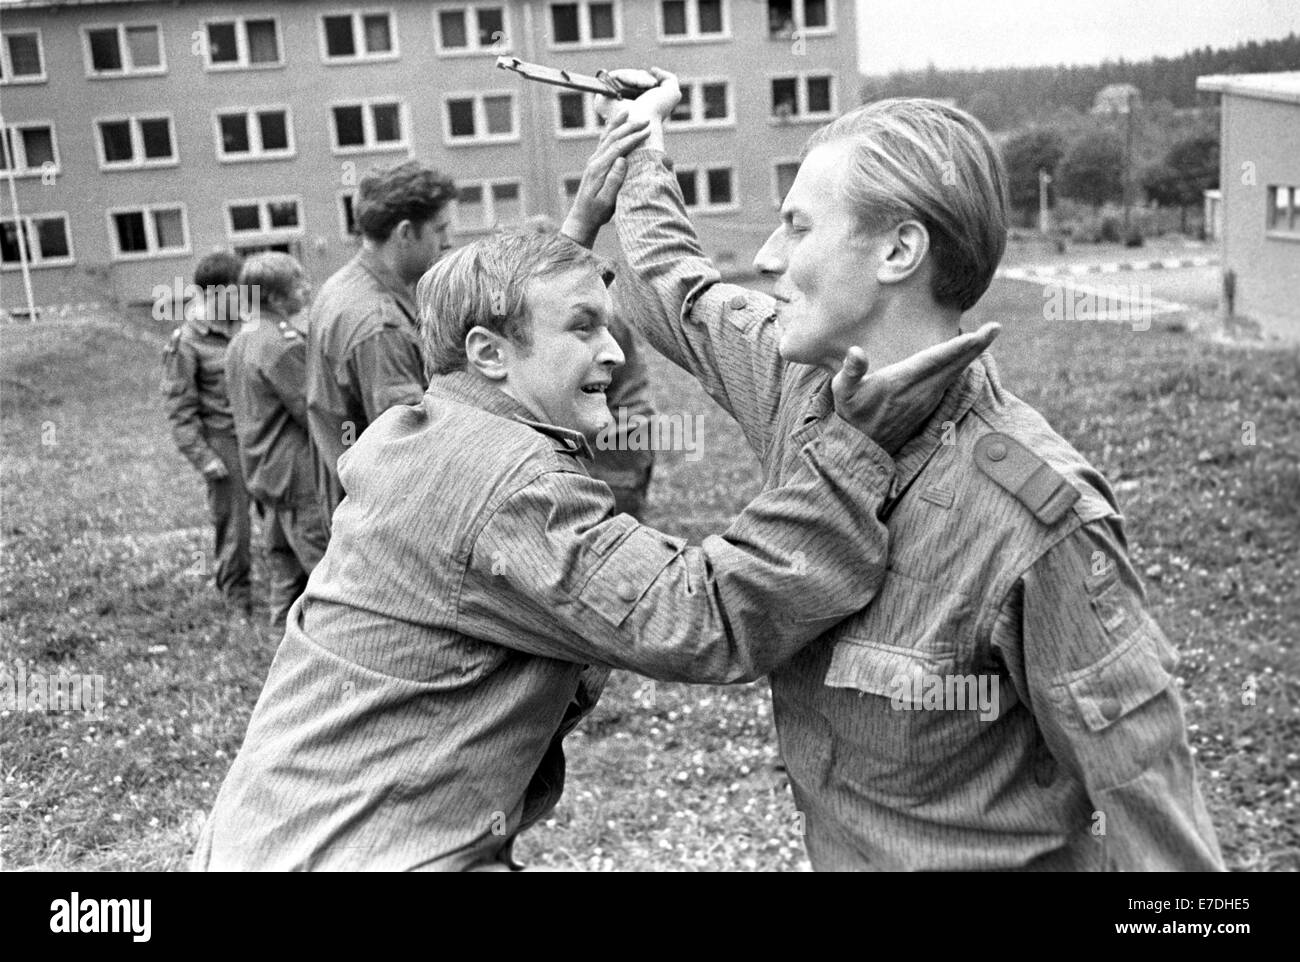 A paratrooper hits an 'enemy' and defends himself against a knife attack during a training session with a unit of the East German National People's Army (NPA) in Prora, Germany, 1976. Photo: Ernst-Ludwig Bach Stock Photo